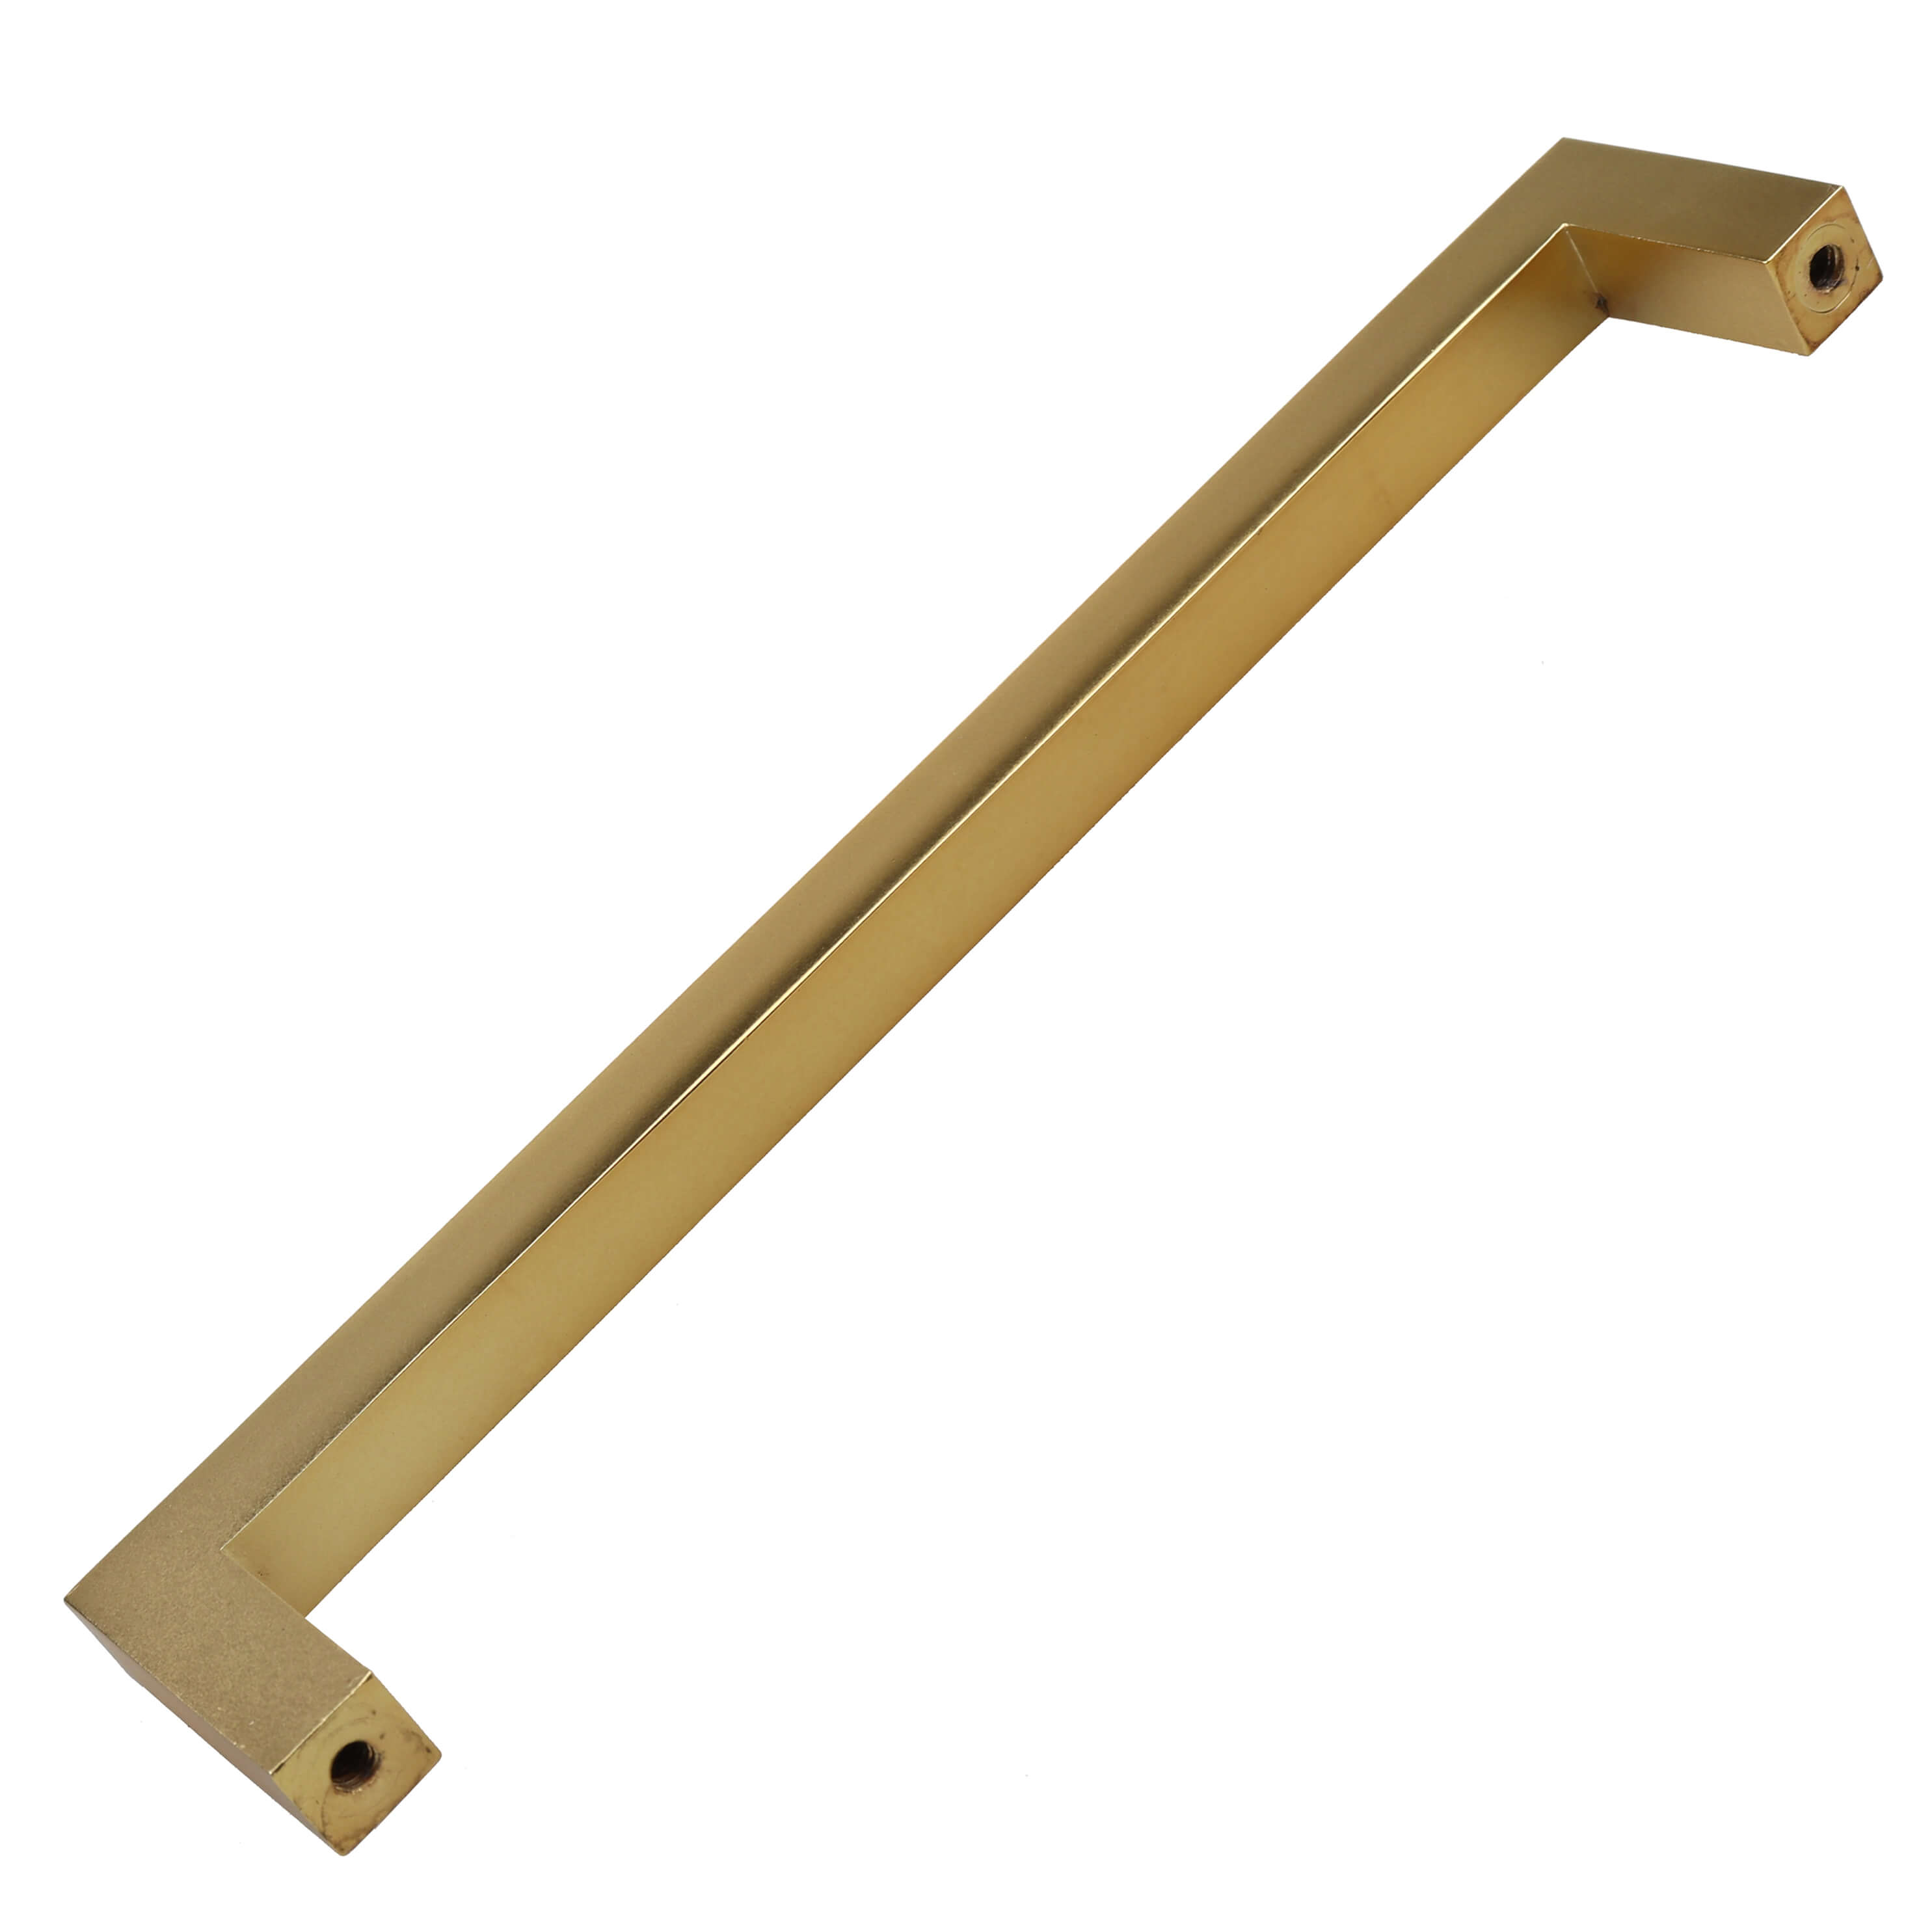 GlideRite 6-1/4 in. Center Solid Square Bar Cabinet Pulls, Brass Gold, Pack of 5 - image 2 of 3